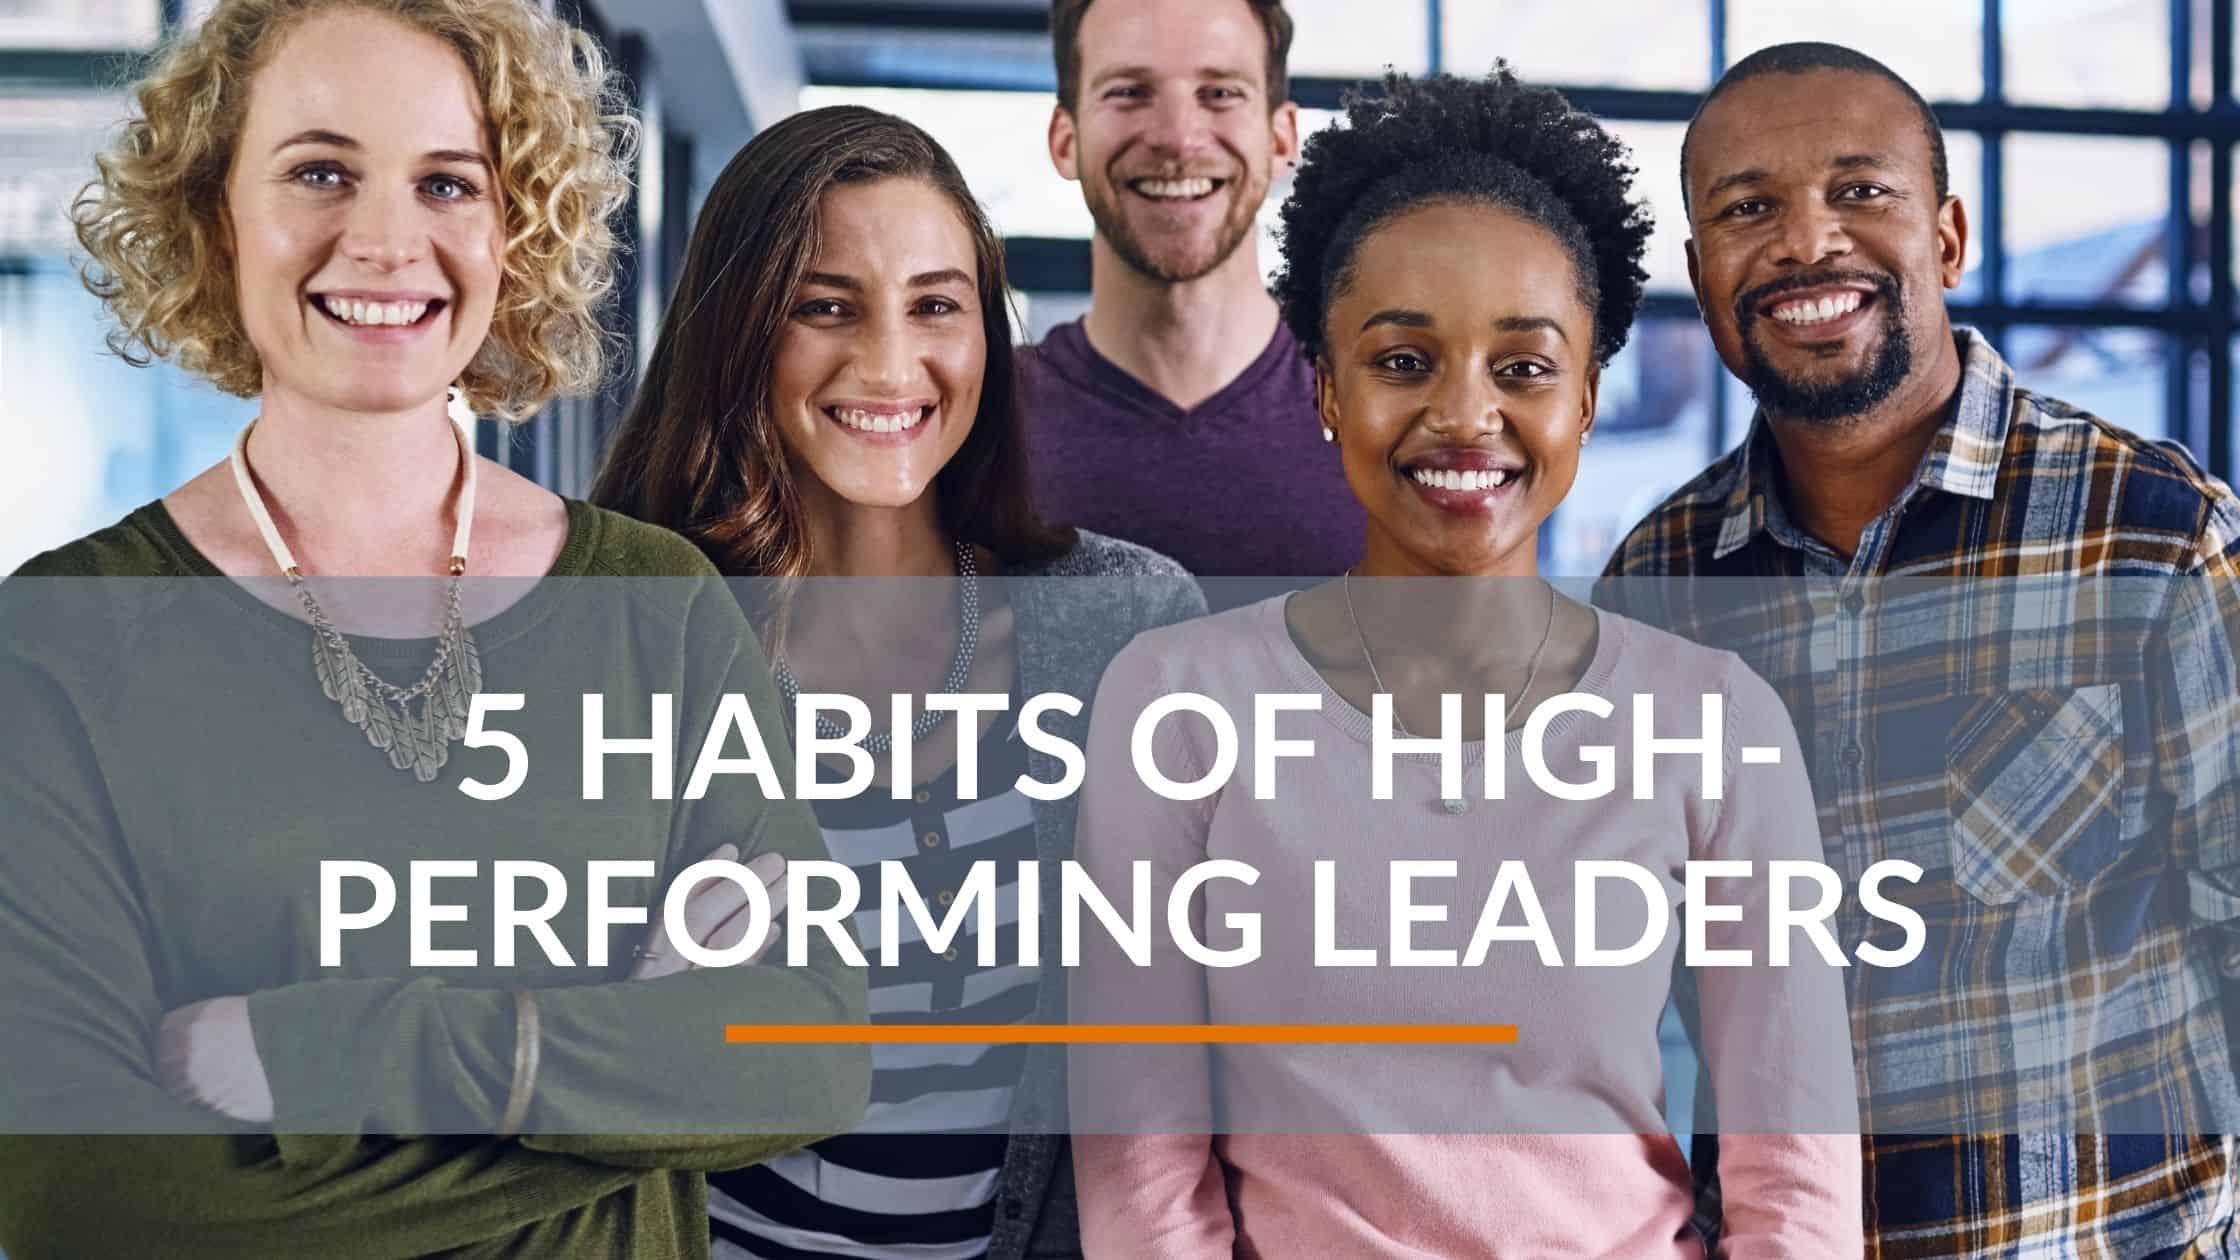 High-performing leaders do these five things differently.